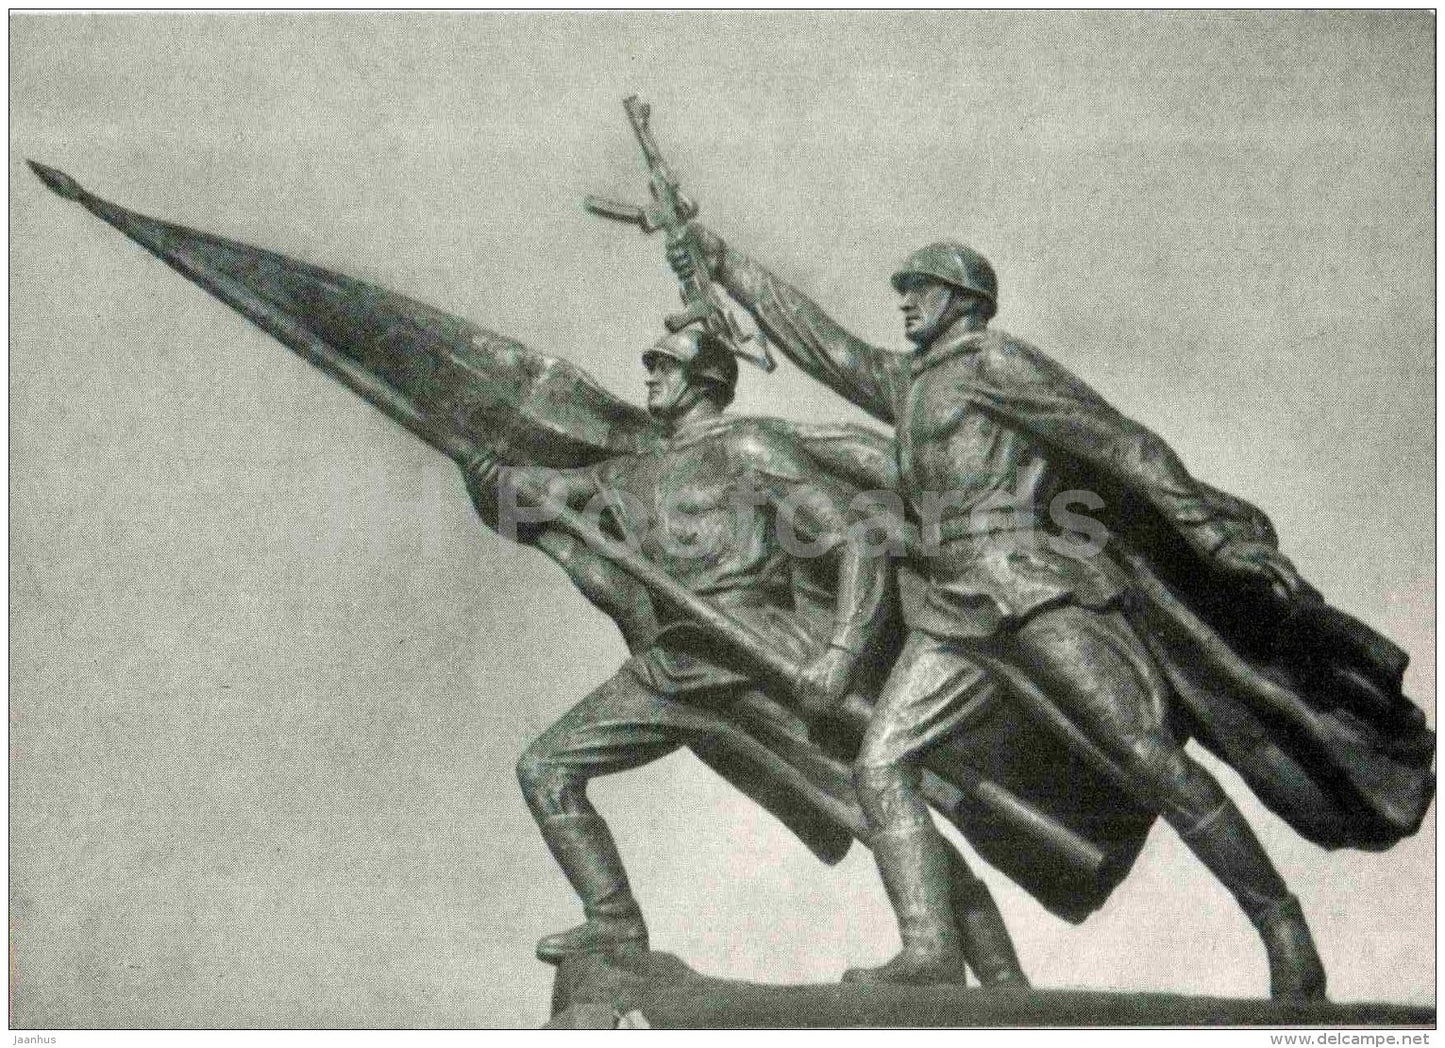 sculpture by Juozas Mikenas - sculptural group Victry in Kaliningrad , 1945-46 - soldiers - lithuanian art - unused - JH Postcards